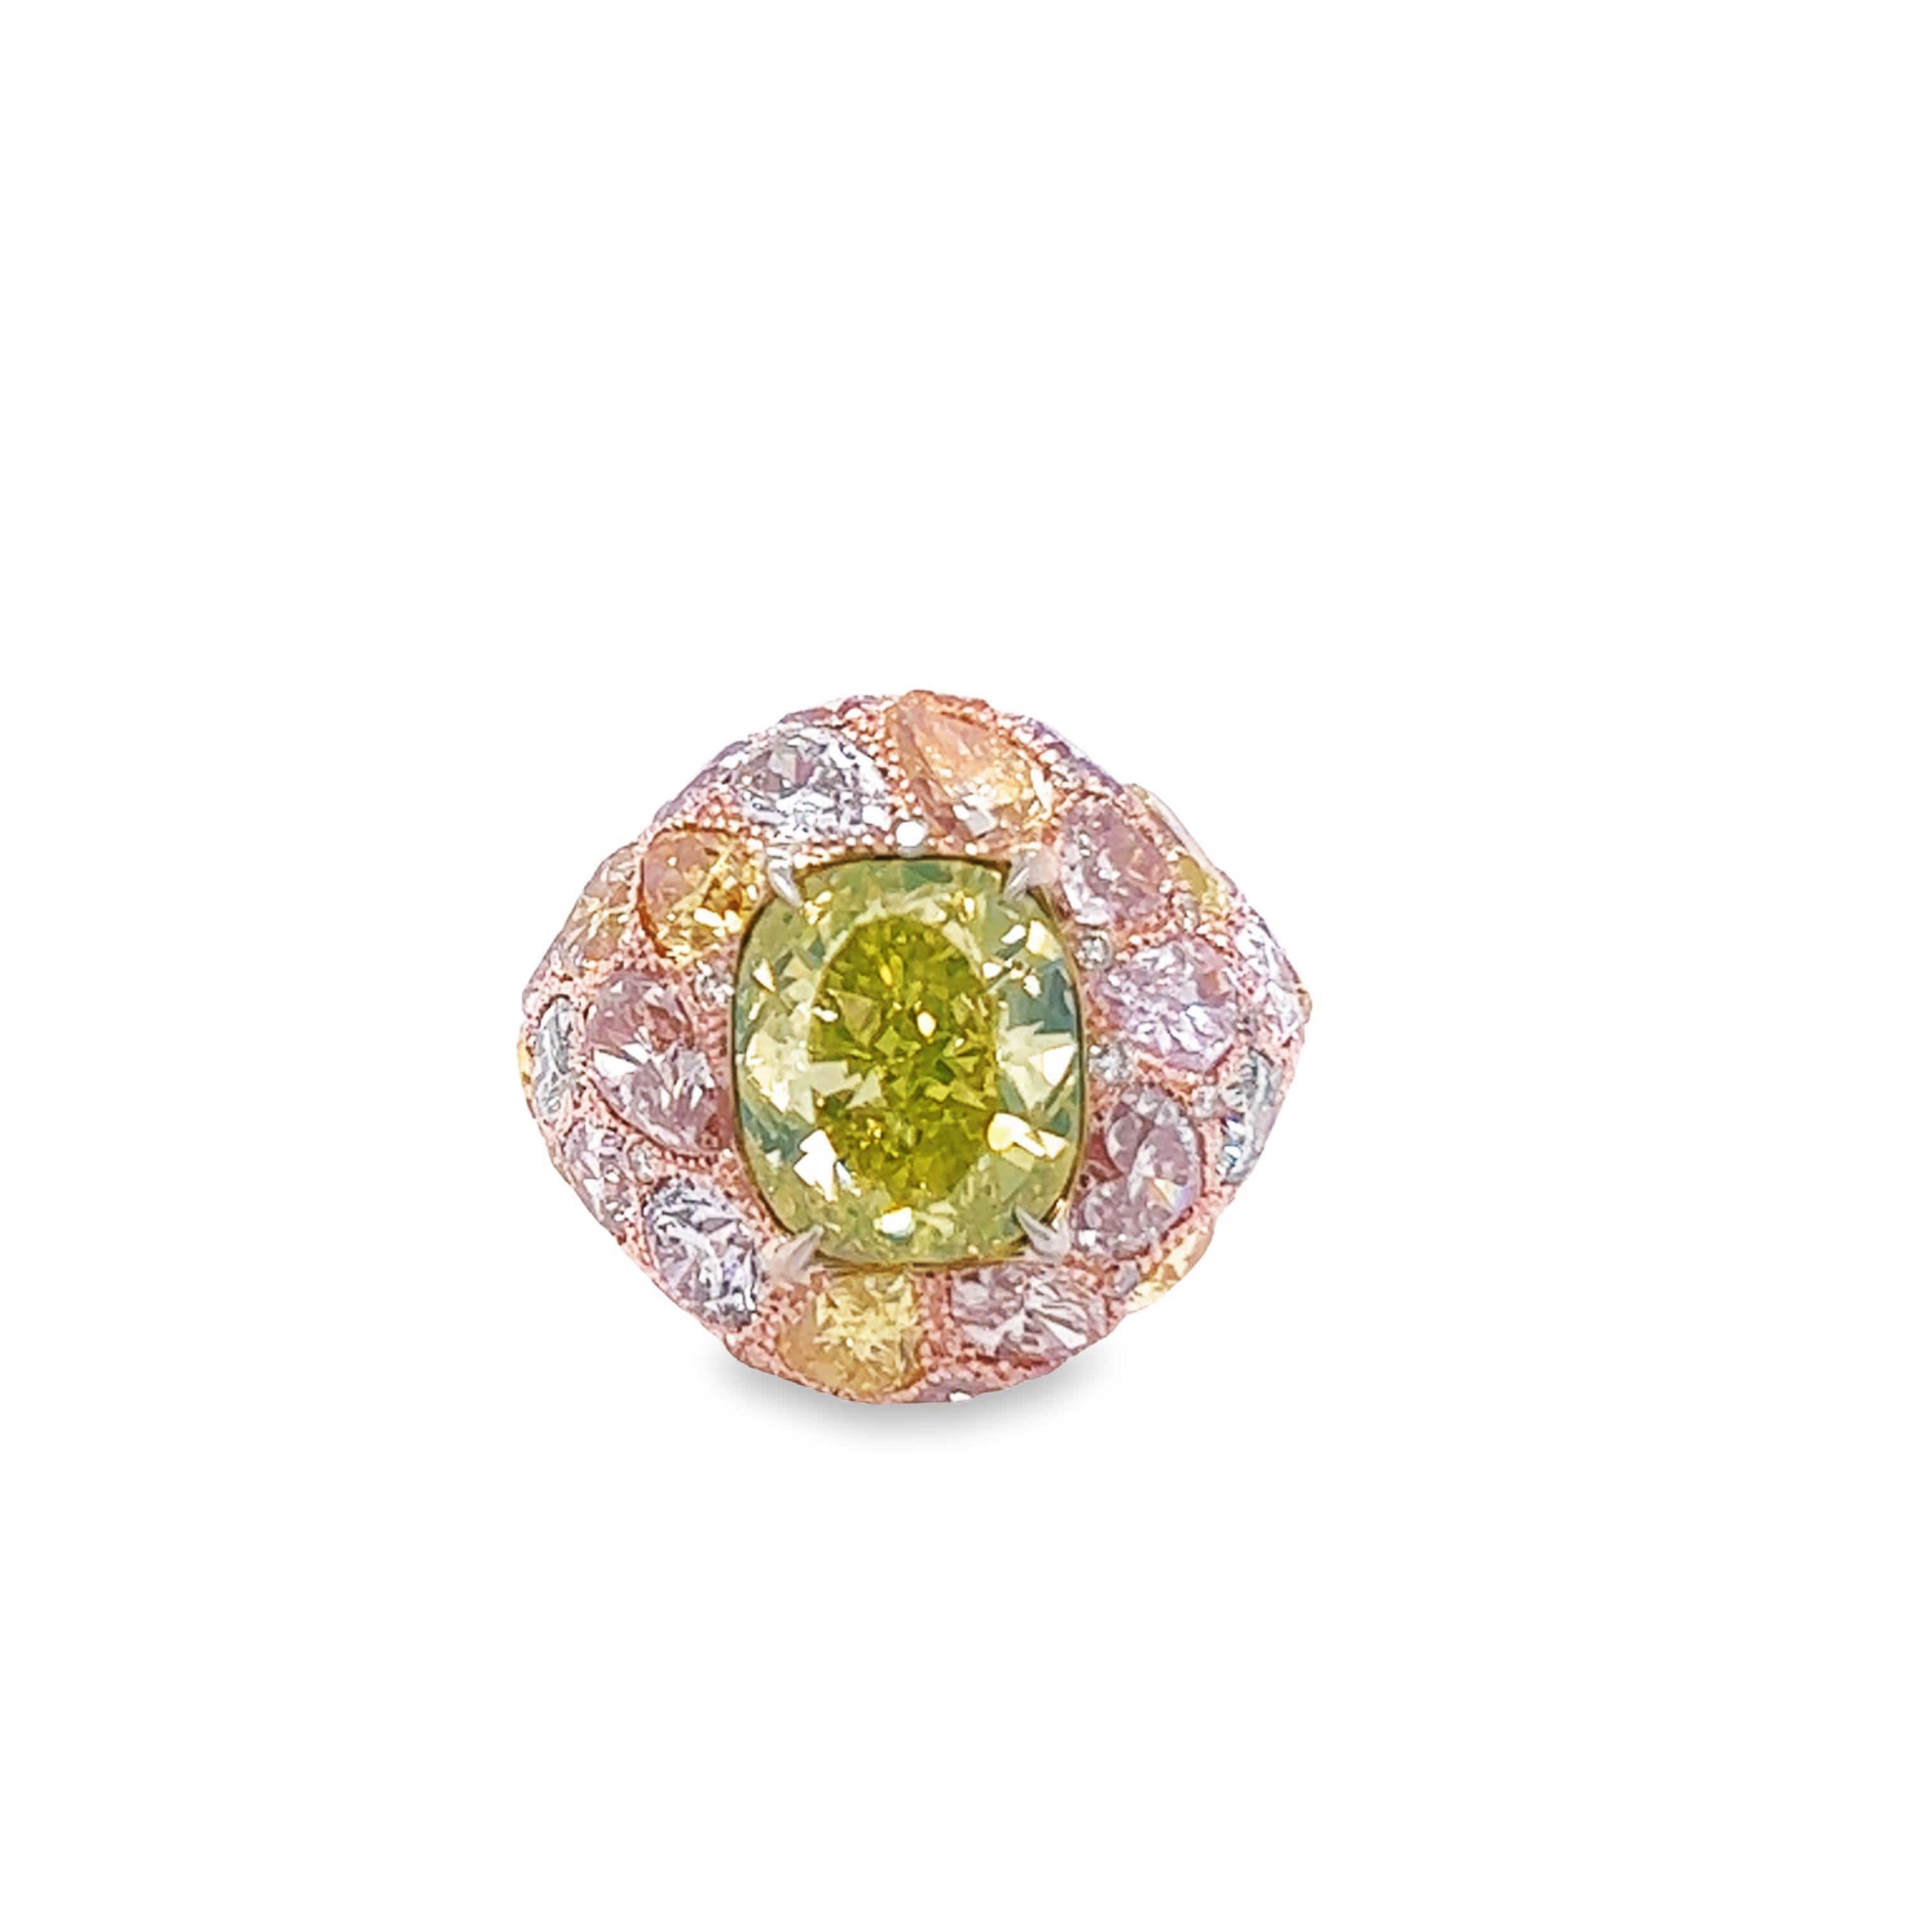 Rosenberg Diamonds & Co. 5.02 carat Cushion Fancy Intense Green Yellow SI1 clarity accompanied by a GIA certificate. This elegant and vibrant dome ring is an exceptional SI1 that is set in a handmade 18 karat rose gold setting with 9.47 total carat